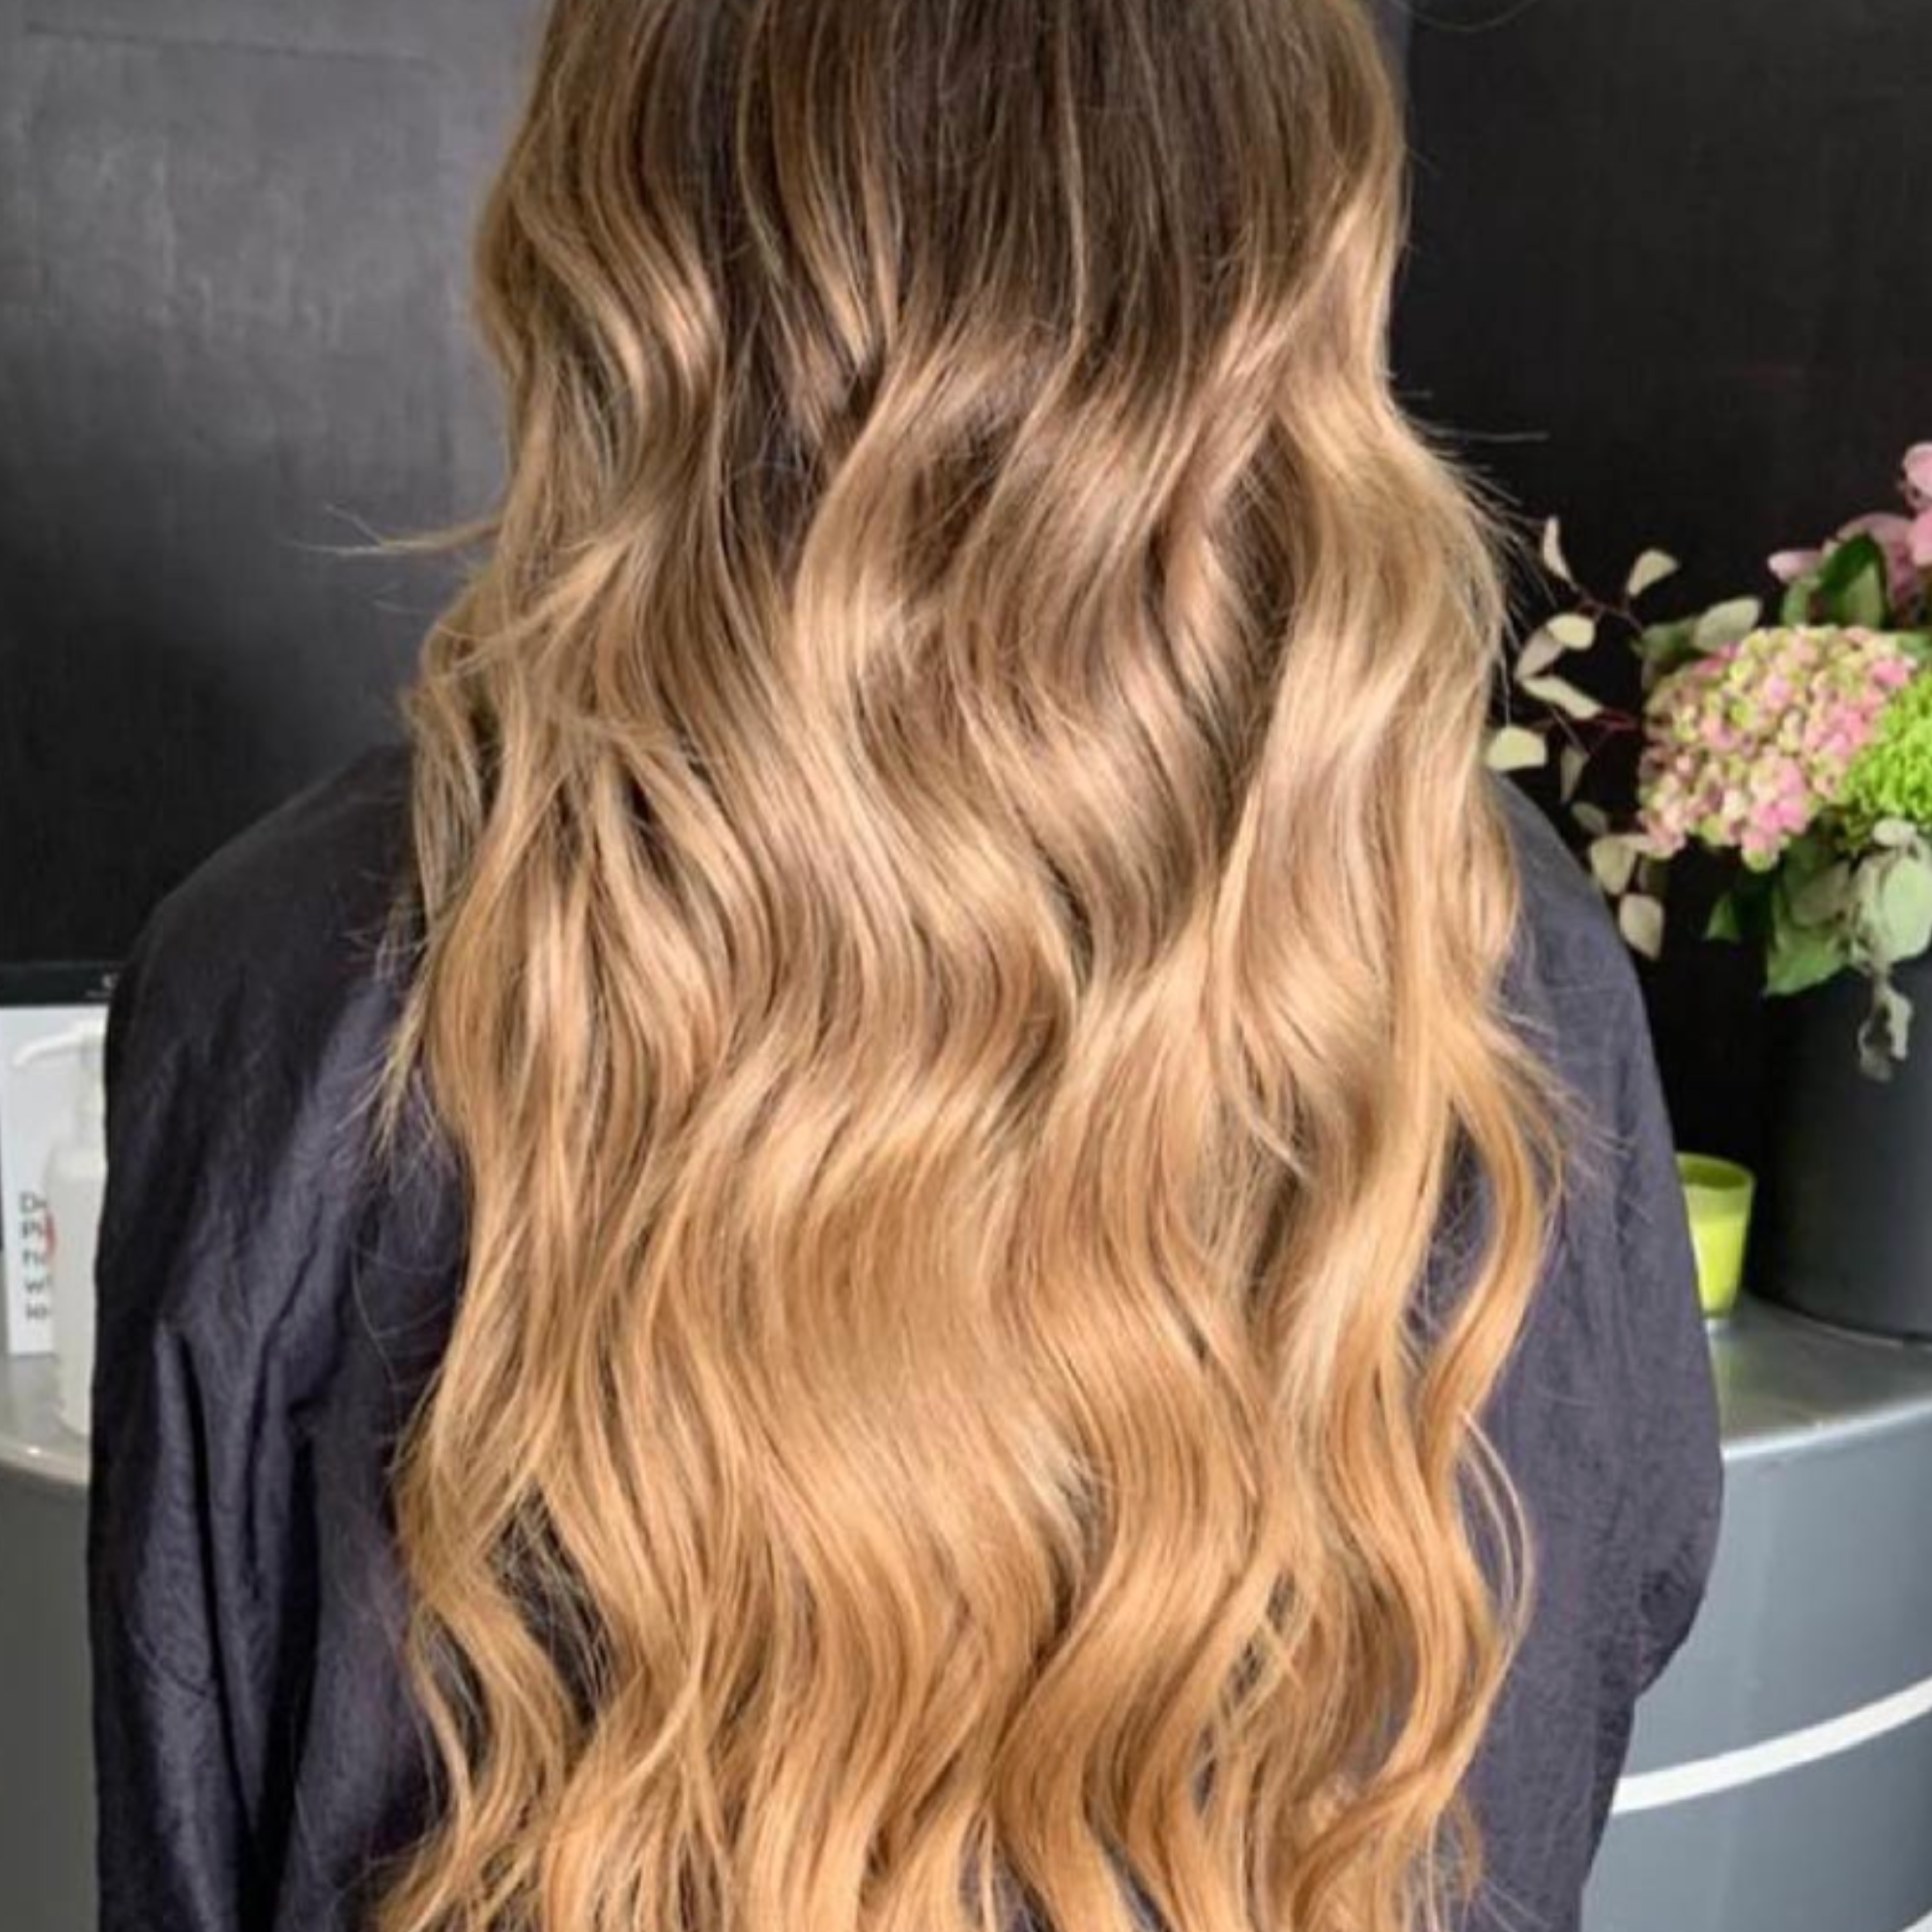 22" Stick Tip Extensions Rooted Boho